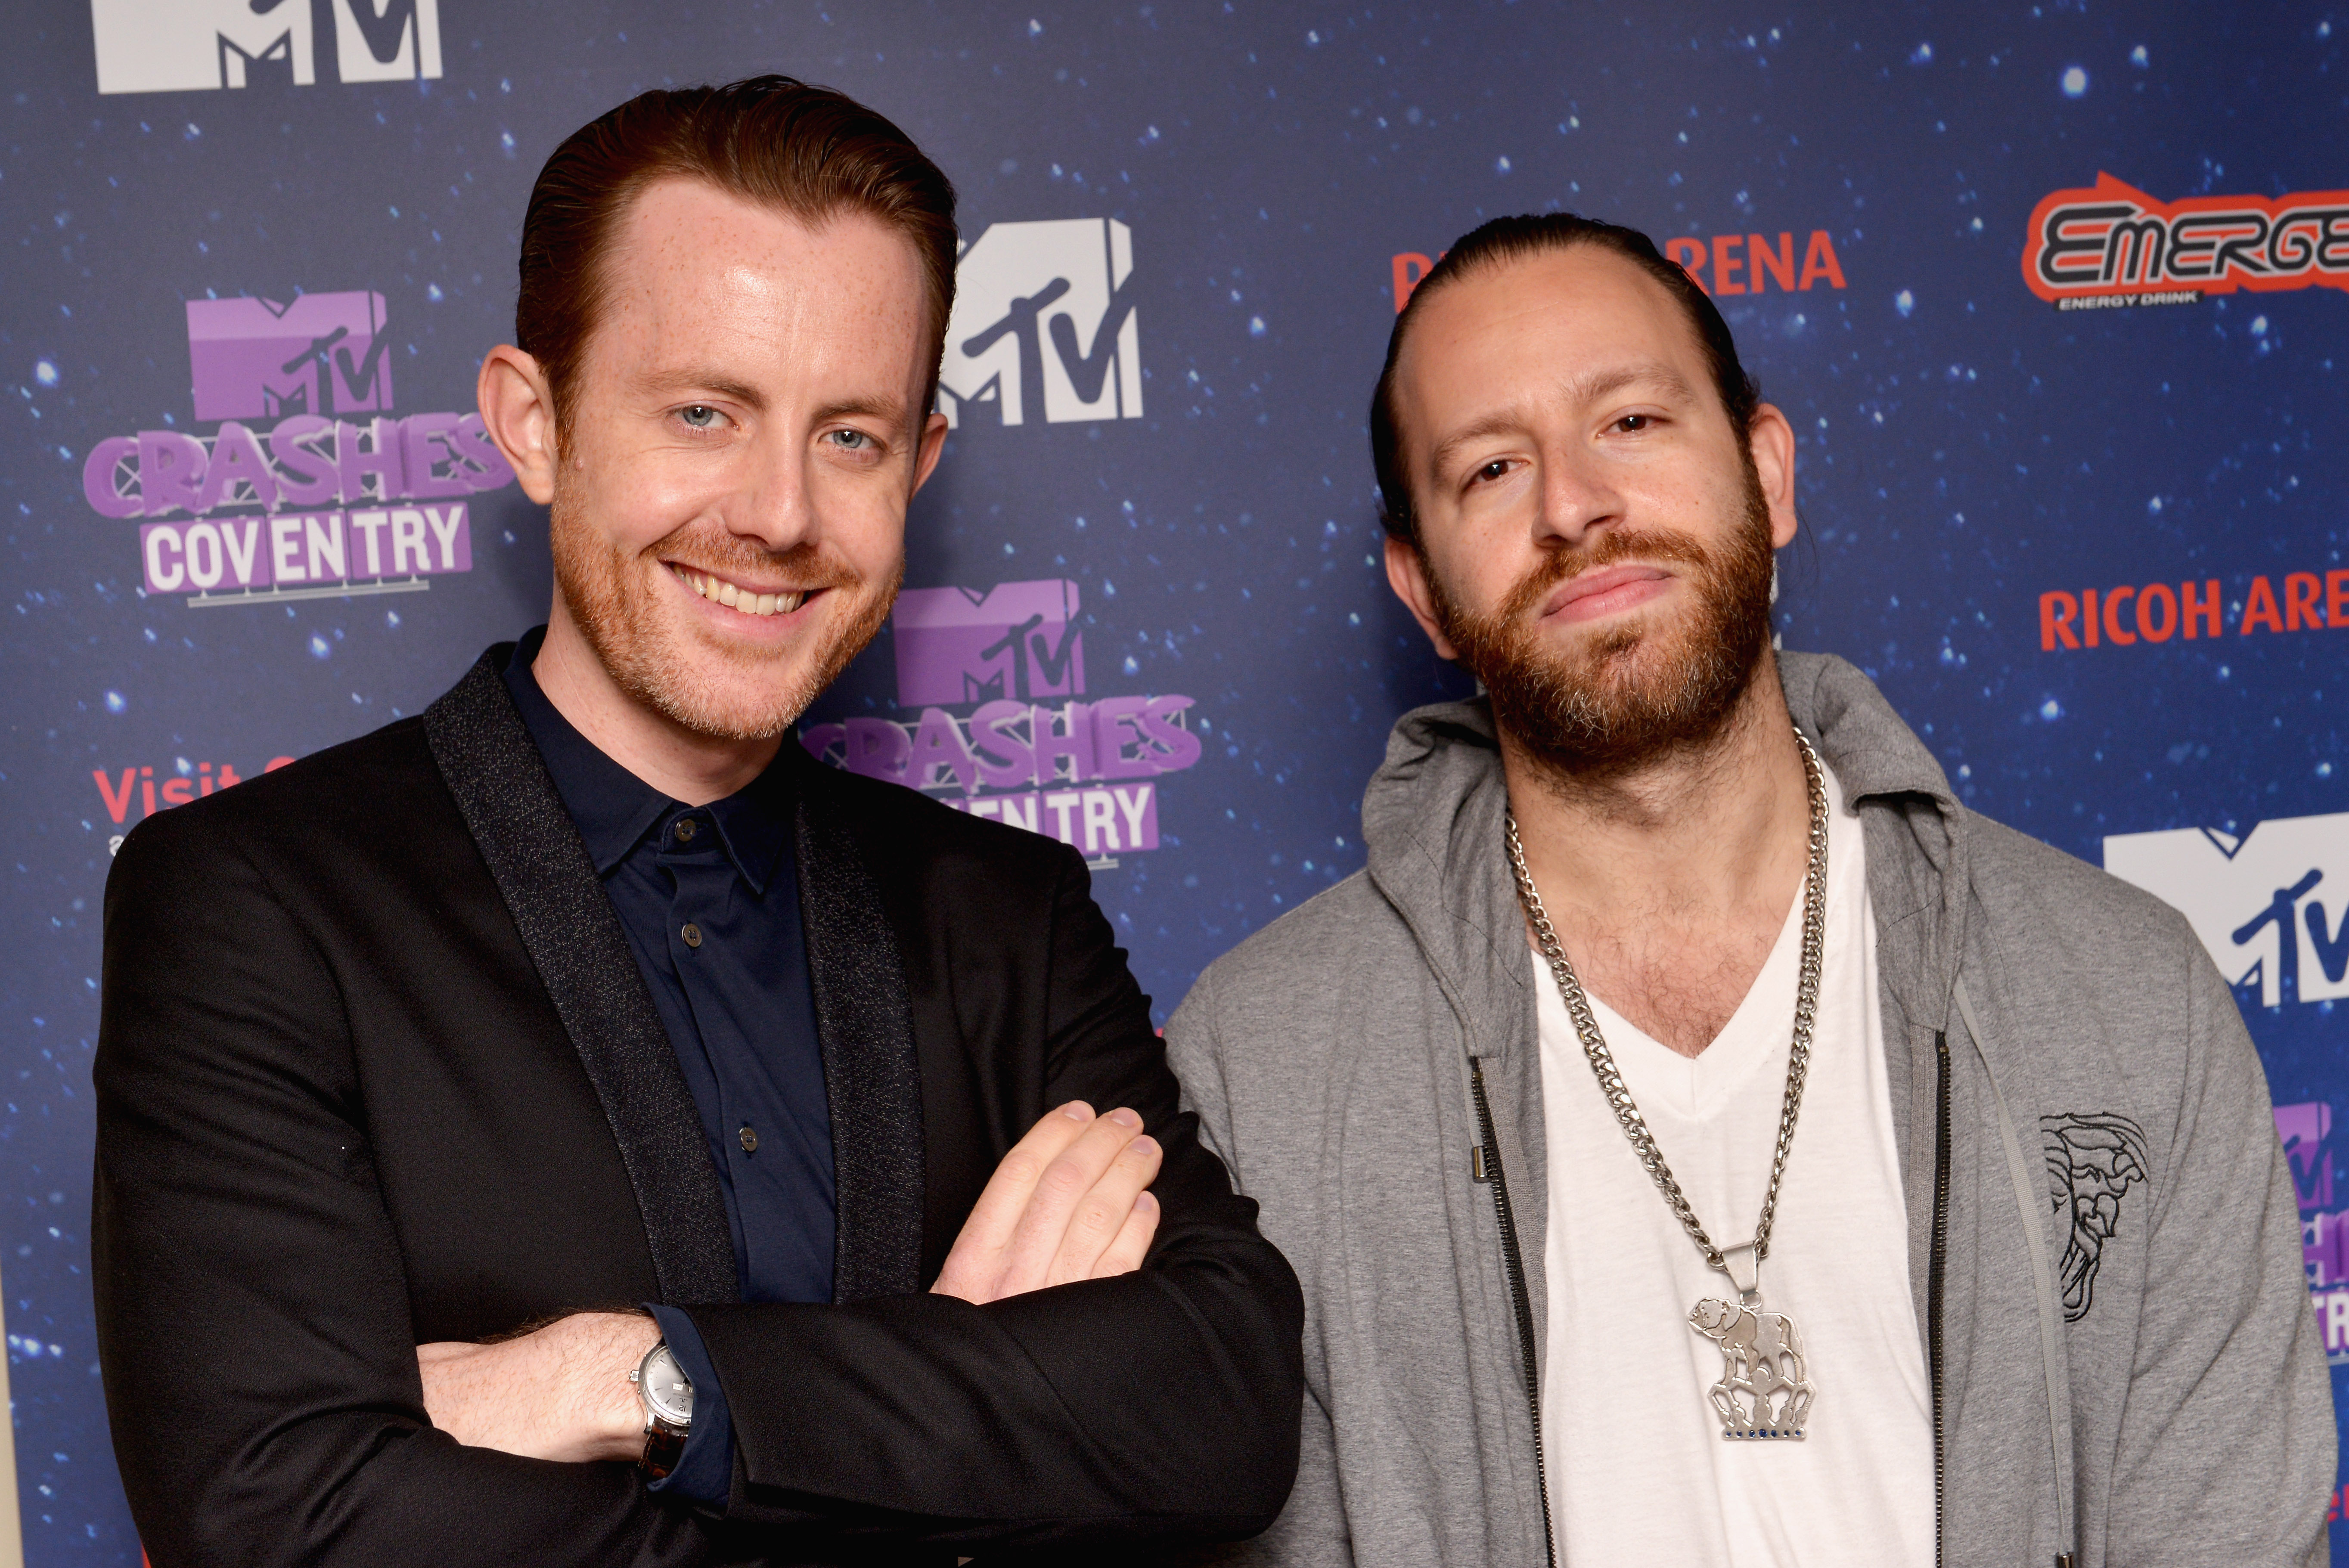 Chase & Status are trailblazers in the drum & bass space and could be teaming up with the grime star